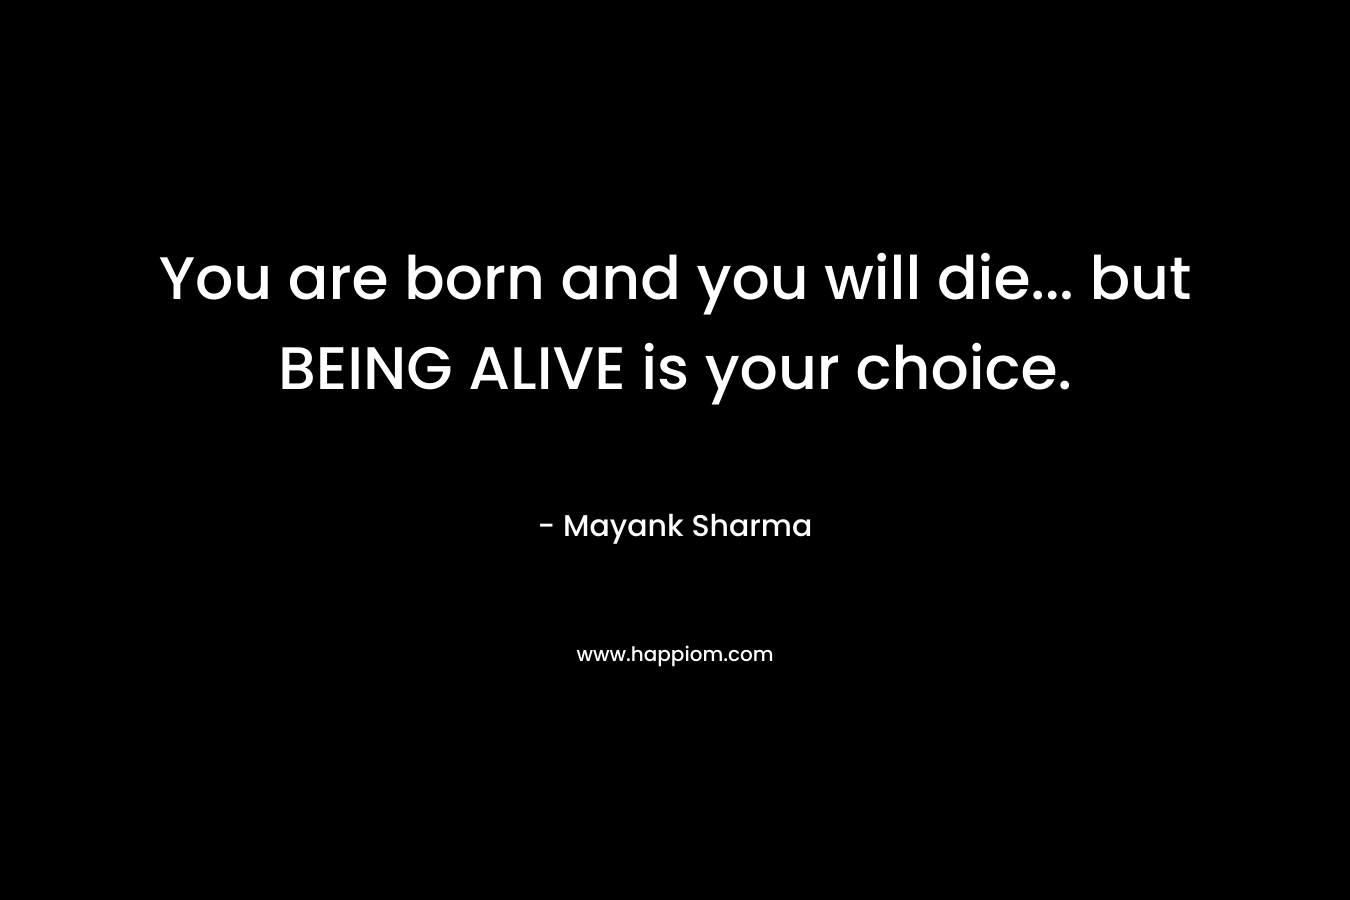 You are born and you will die... but BEING ALIVE is your choice.